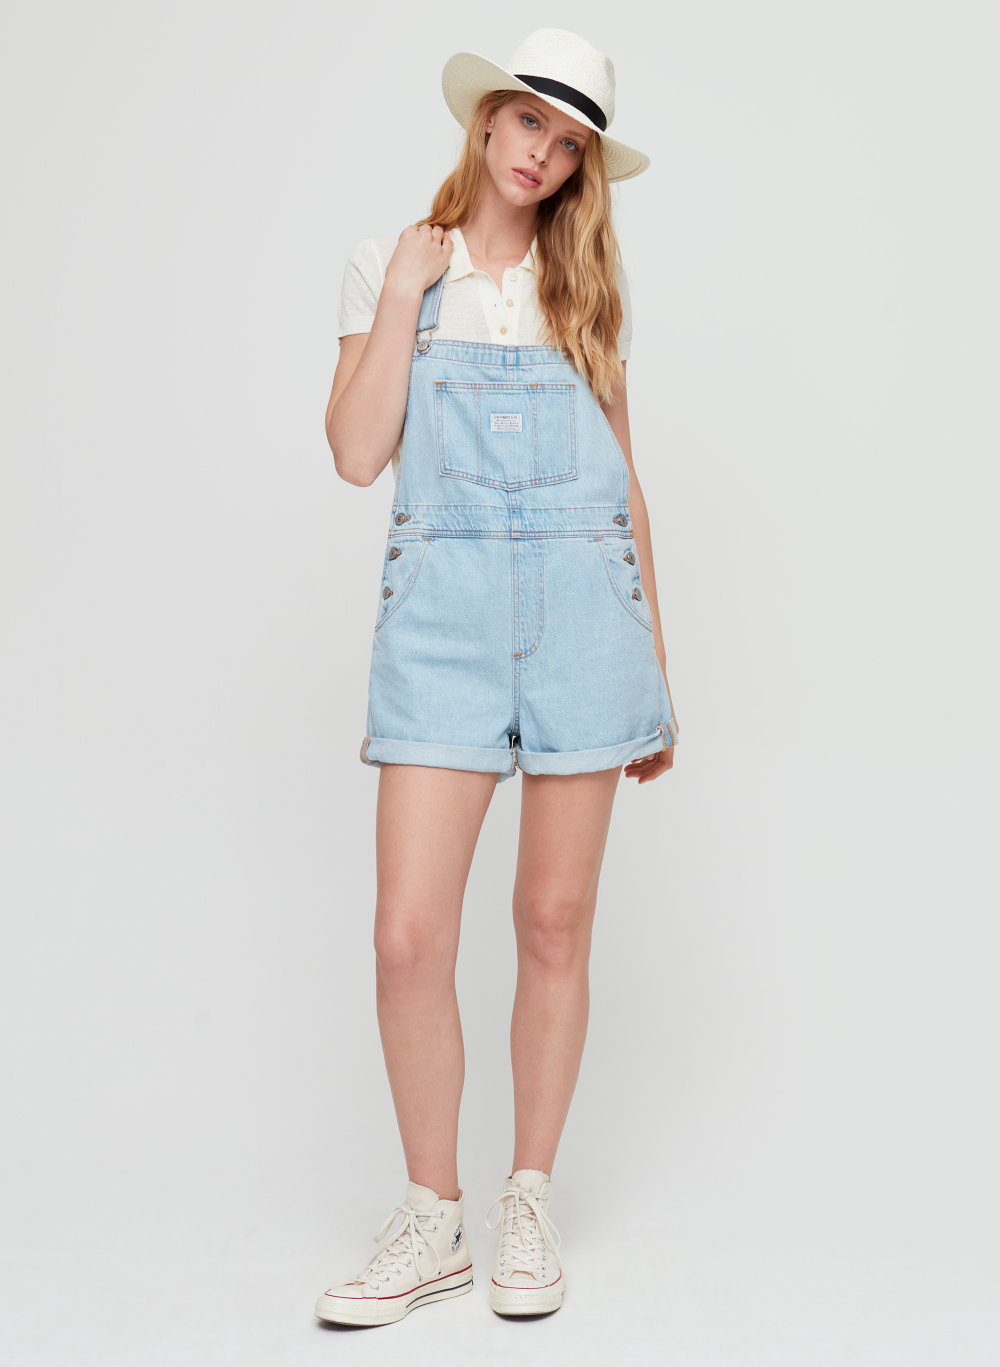 levis short and sweet vintage overall